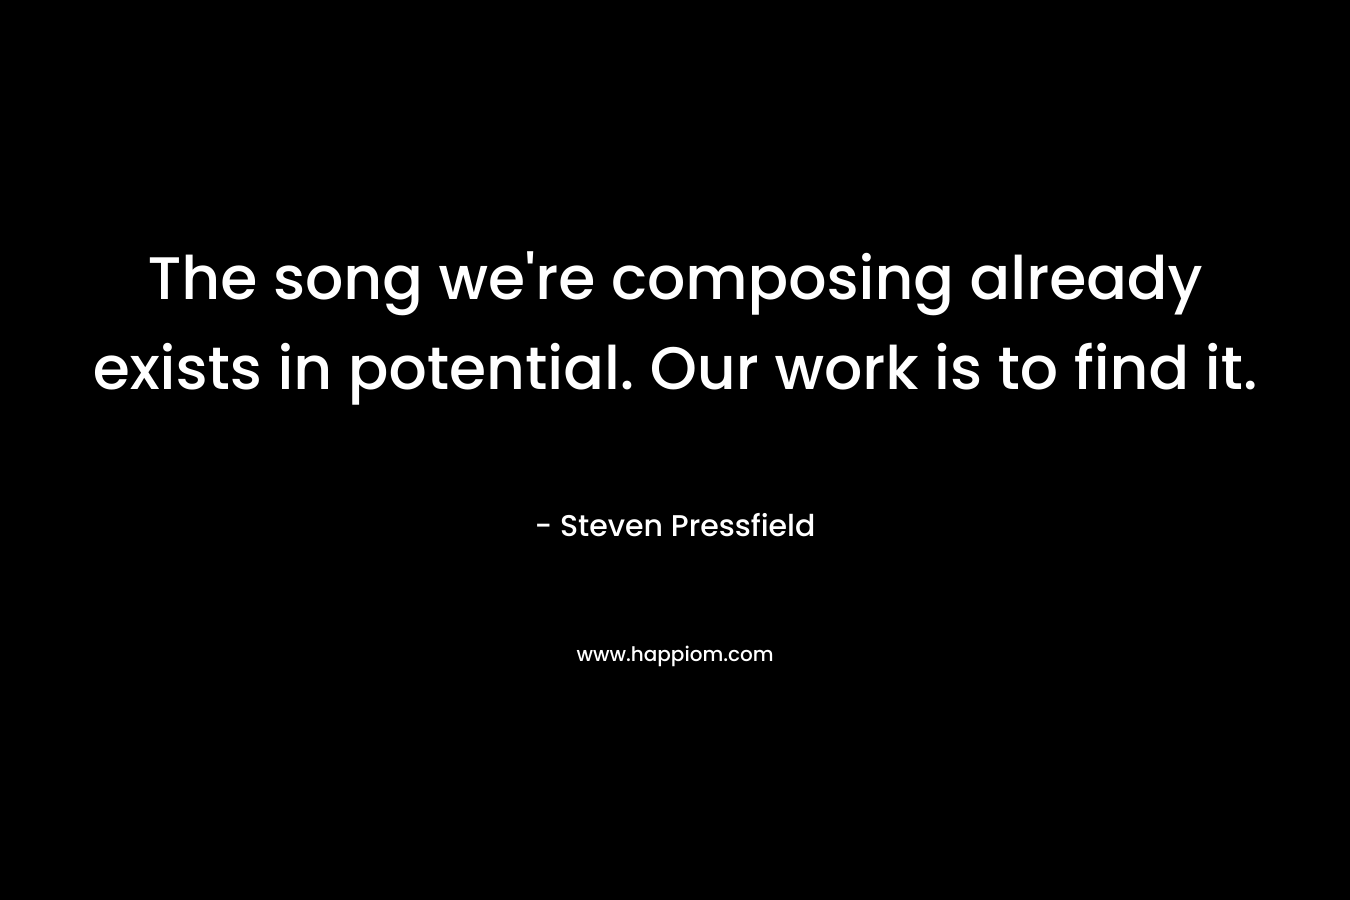 The song we’re composing already exists in potential. Our work is to find it. – Steven Pressfield